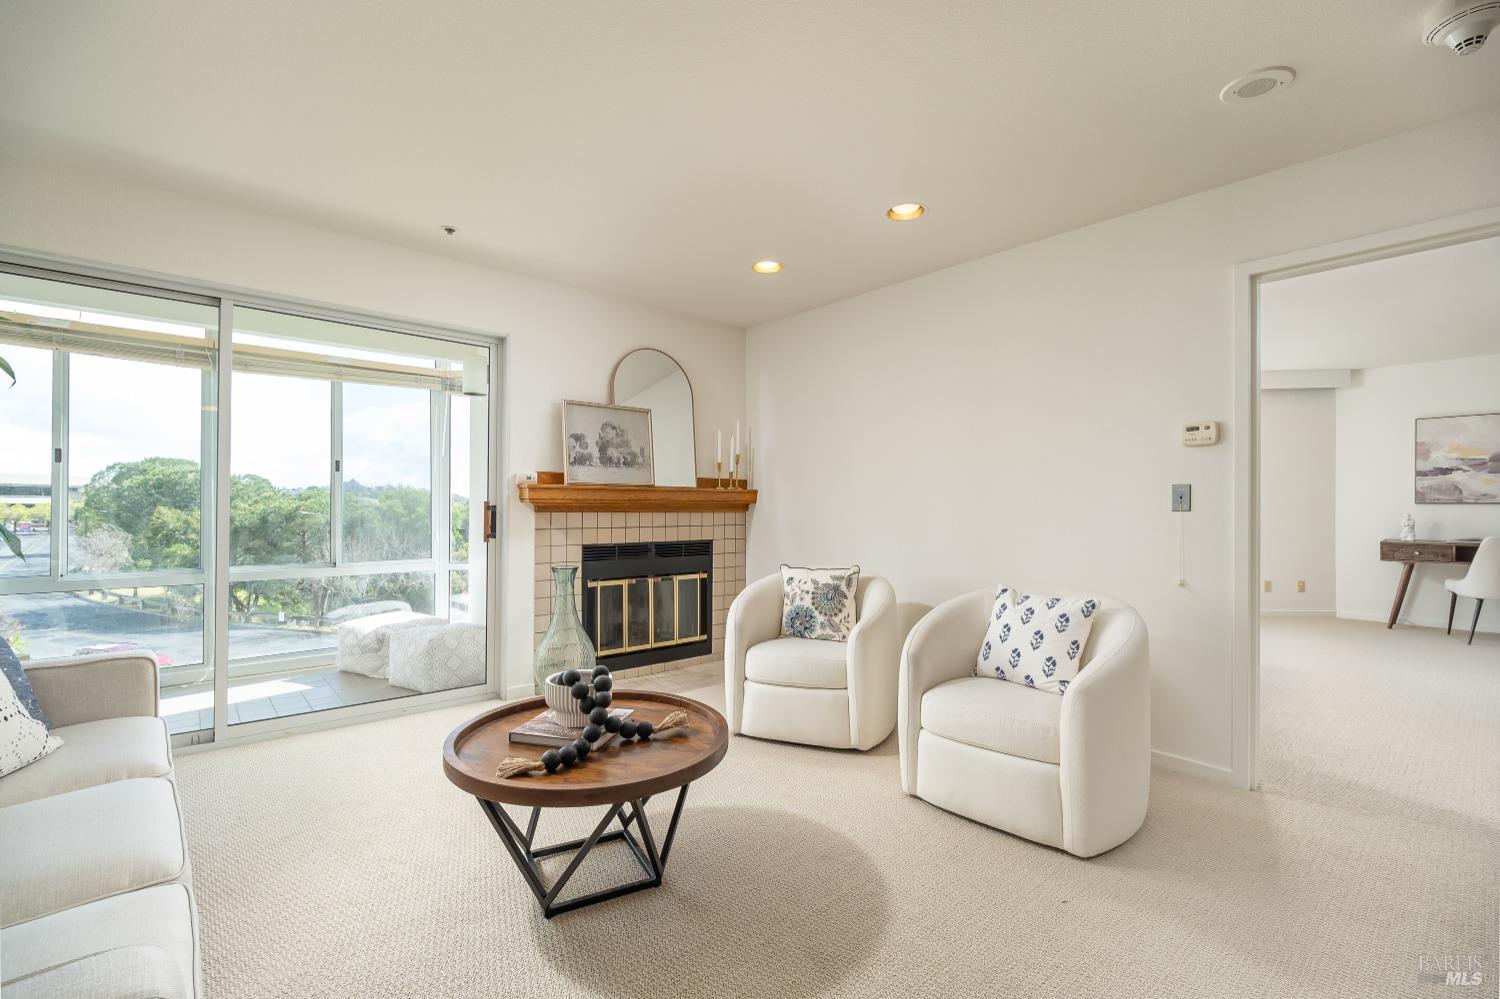 Photo of 100 Thorndale Dr #229 in San Rafael, CA